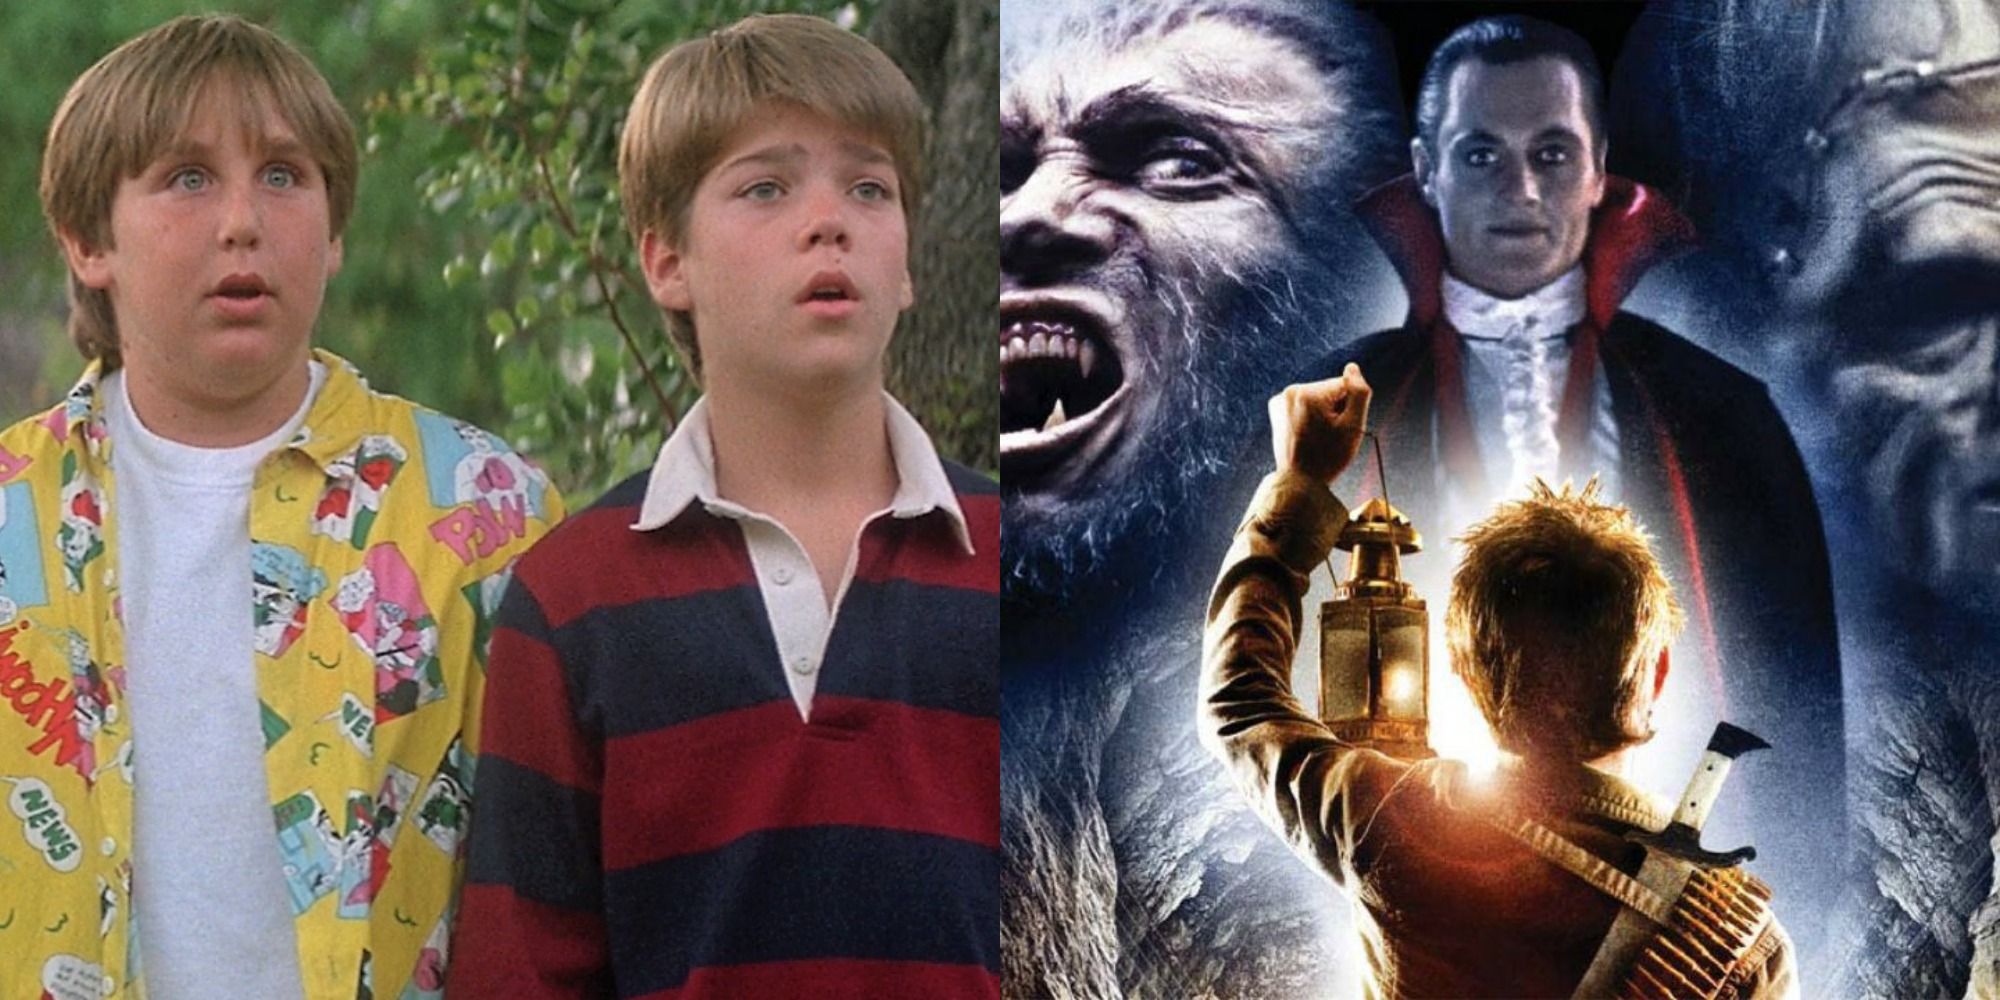 Split image of the kids, along with the poster for Monster Squad.